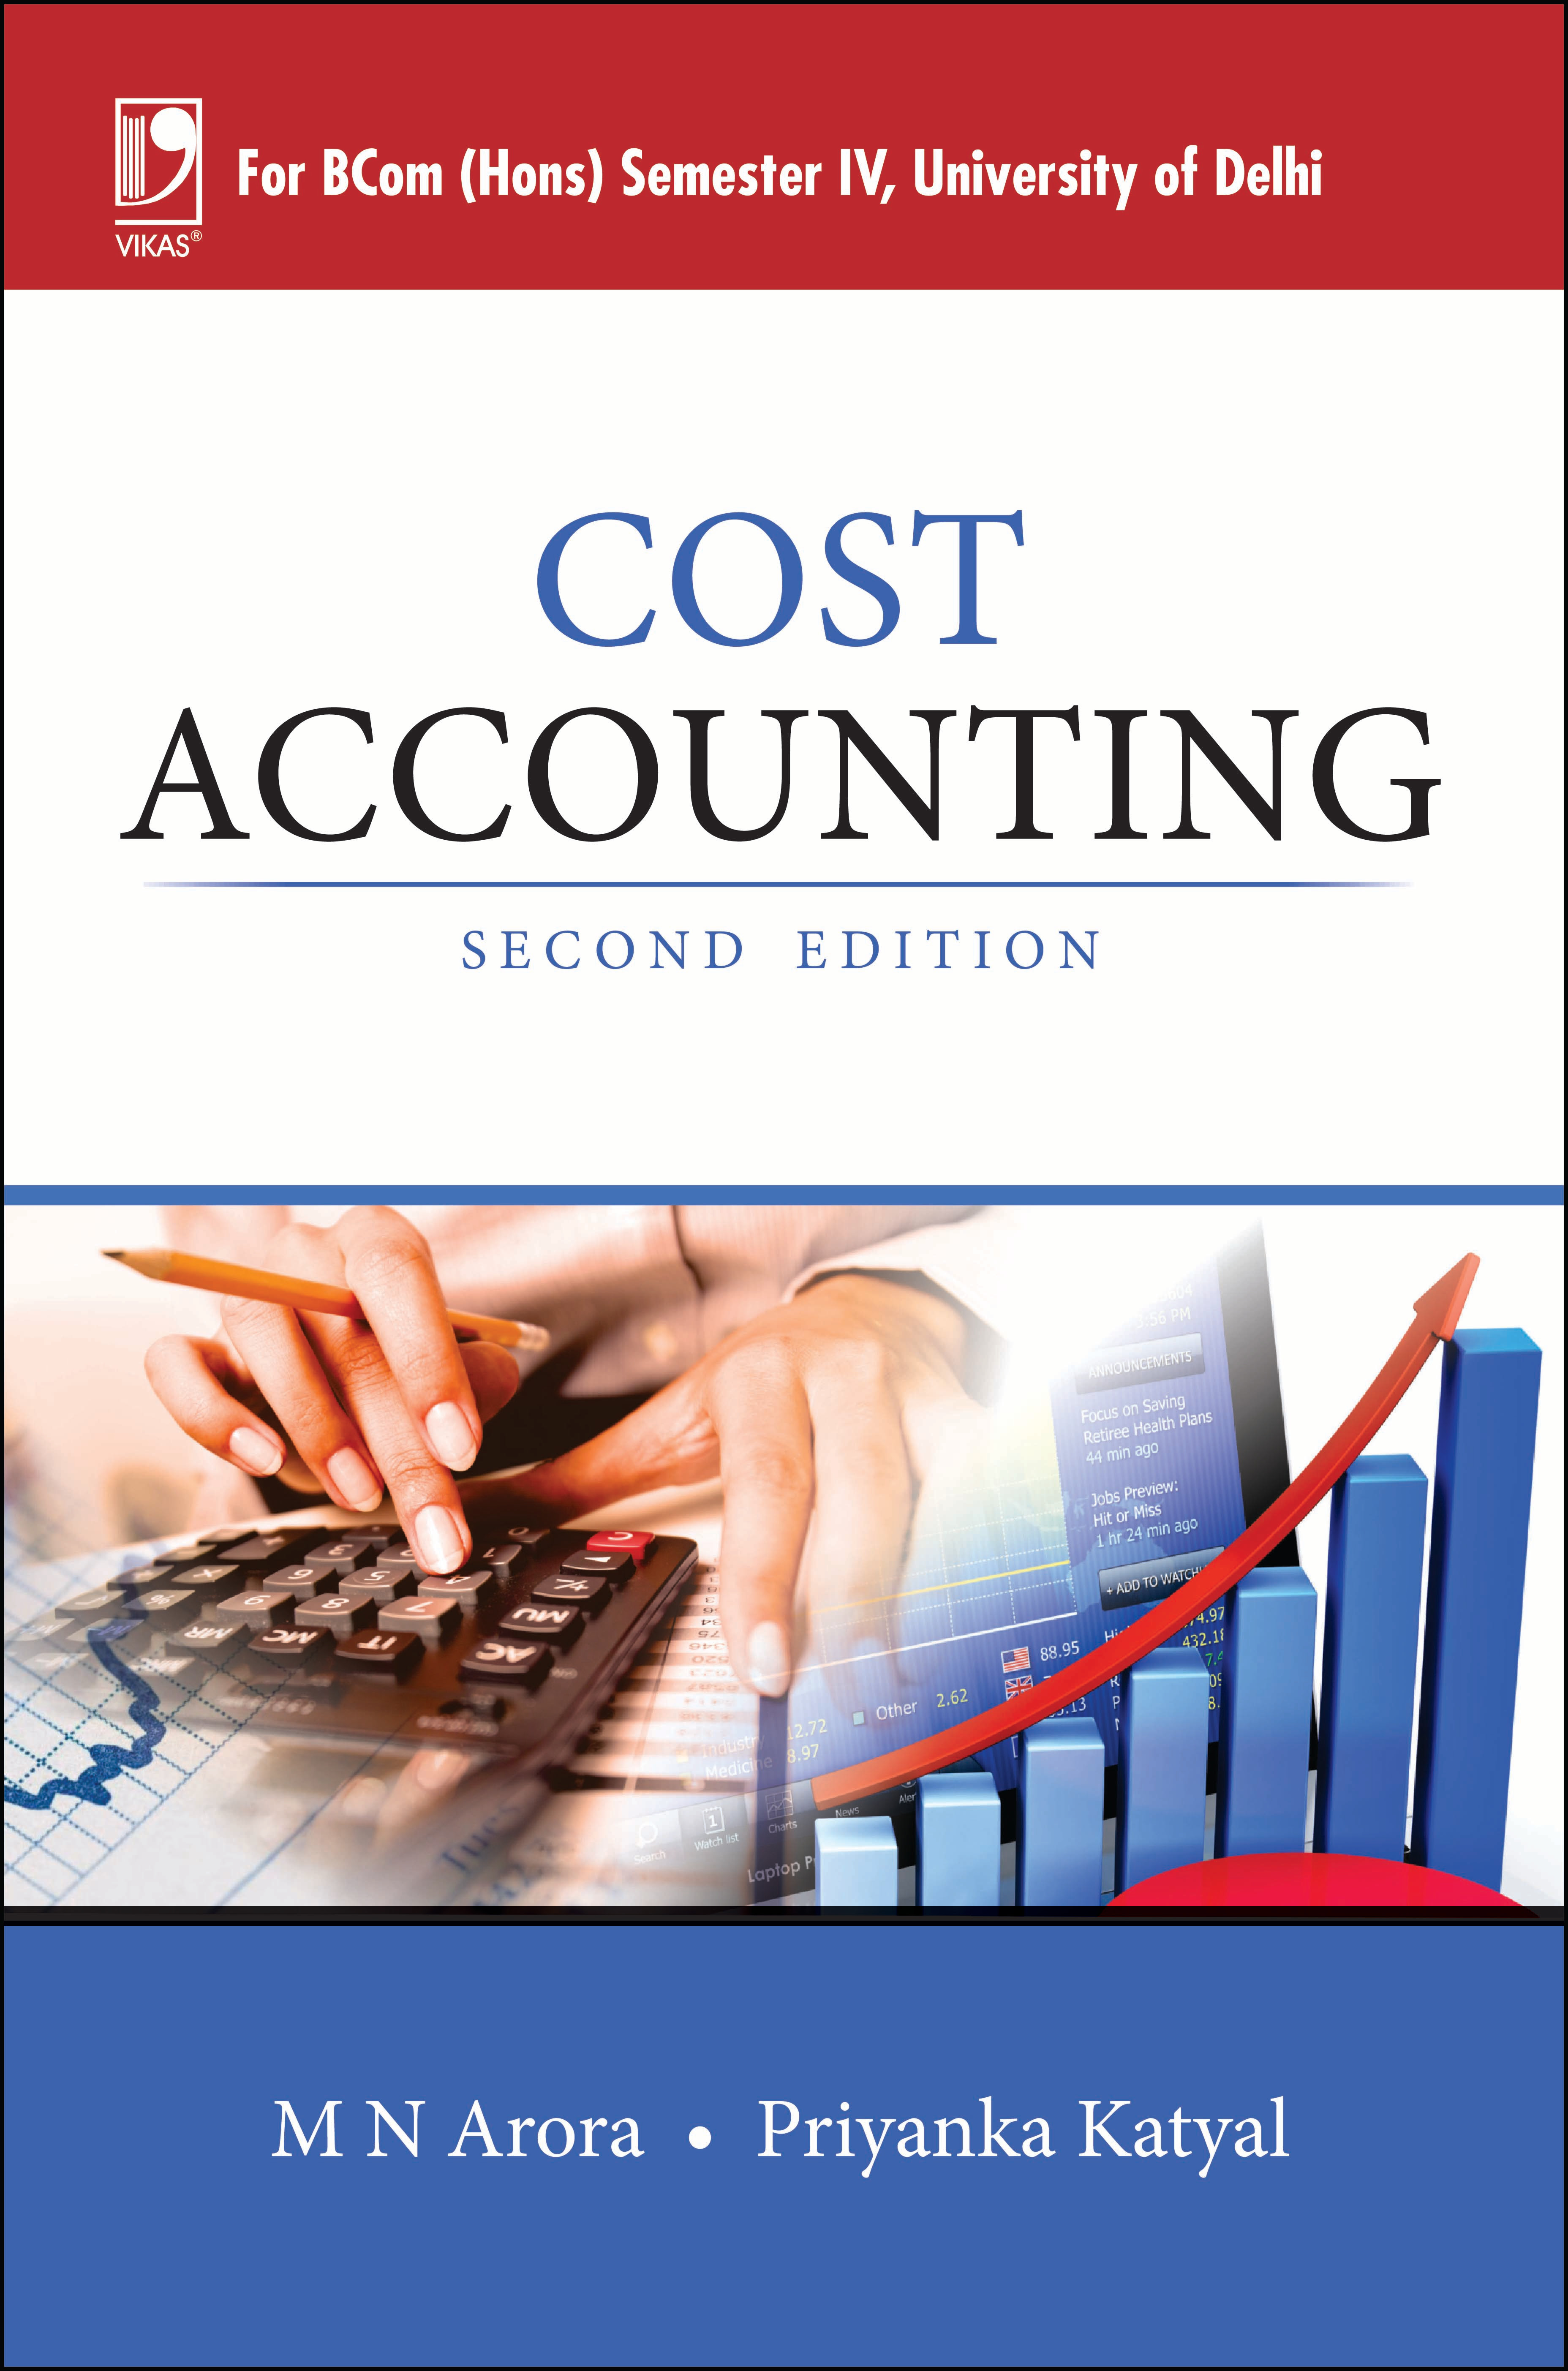 Accounting book. Cost Accounting. Accounting учебник. Book cost Accounting. Management Accounting.